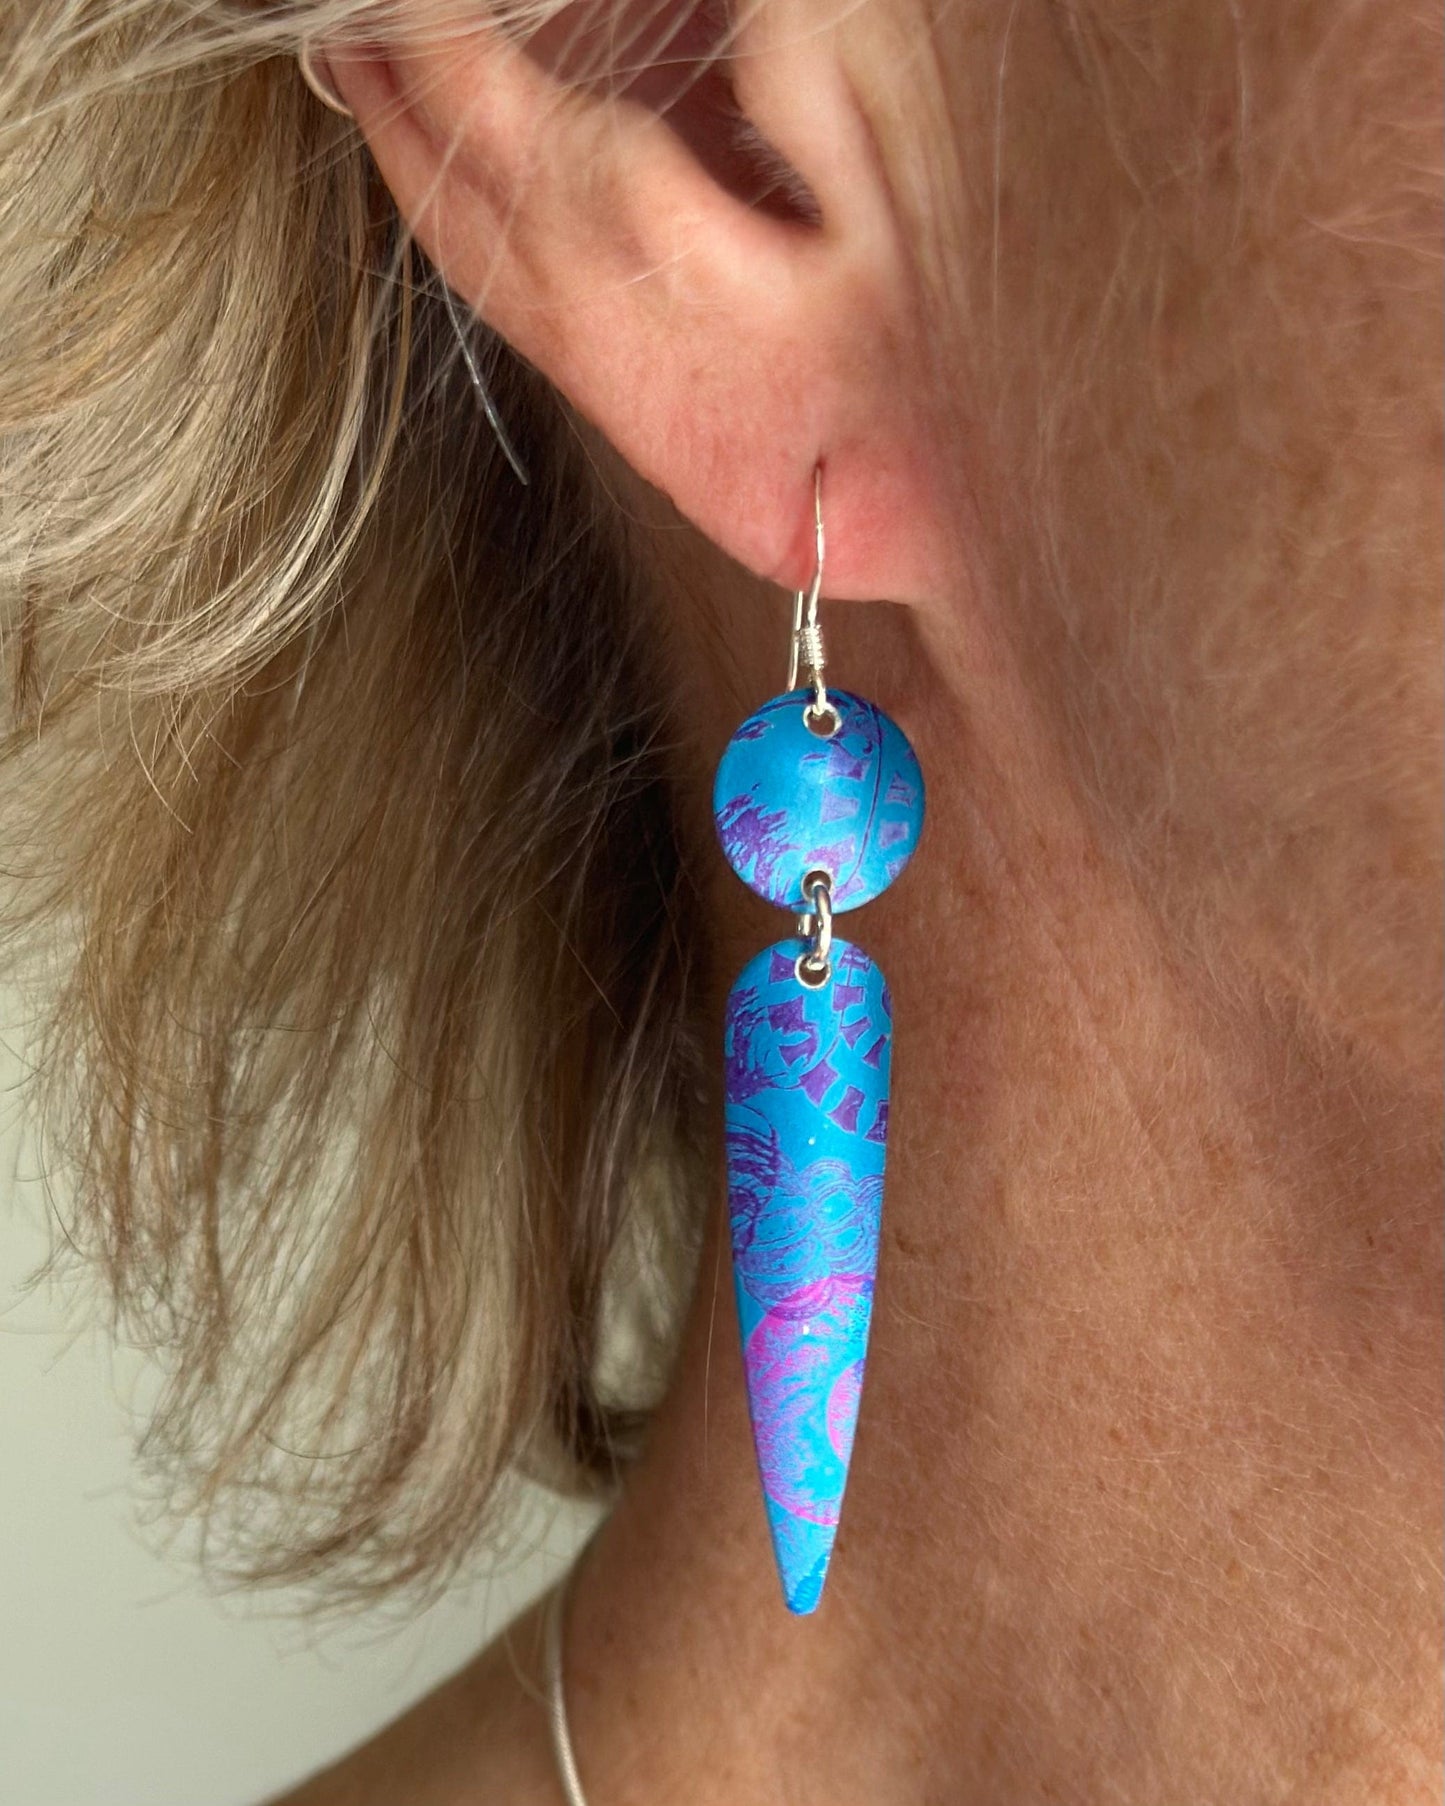 jewellery Sterling Silver And Anodized Aluminium Drop Earrings - Rockpool